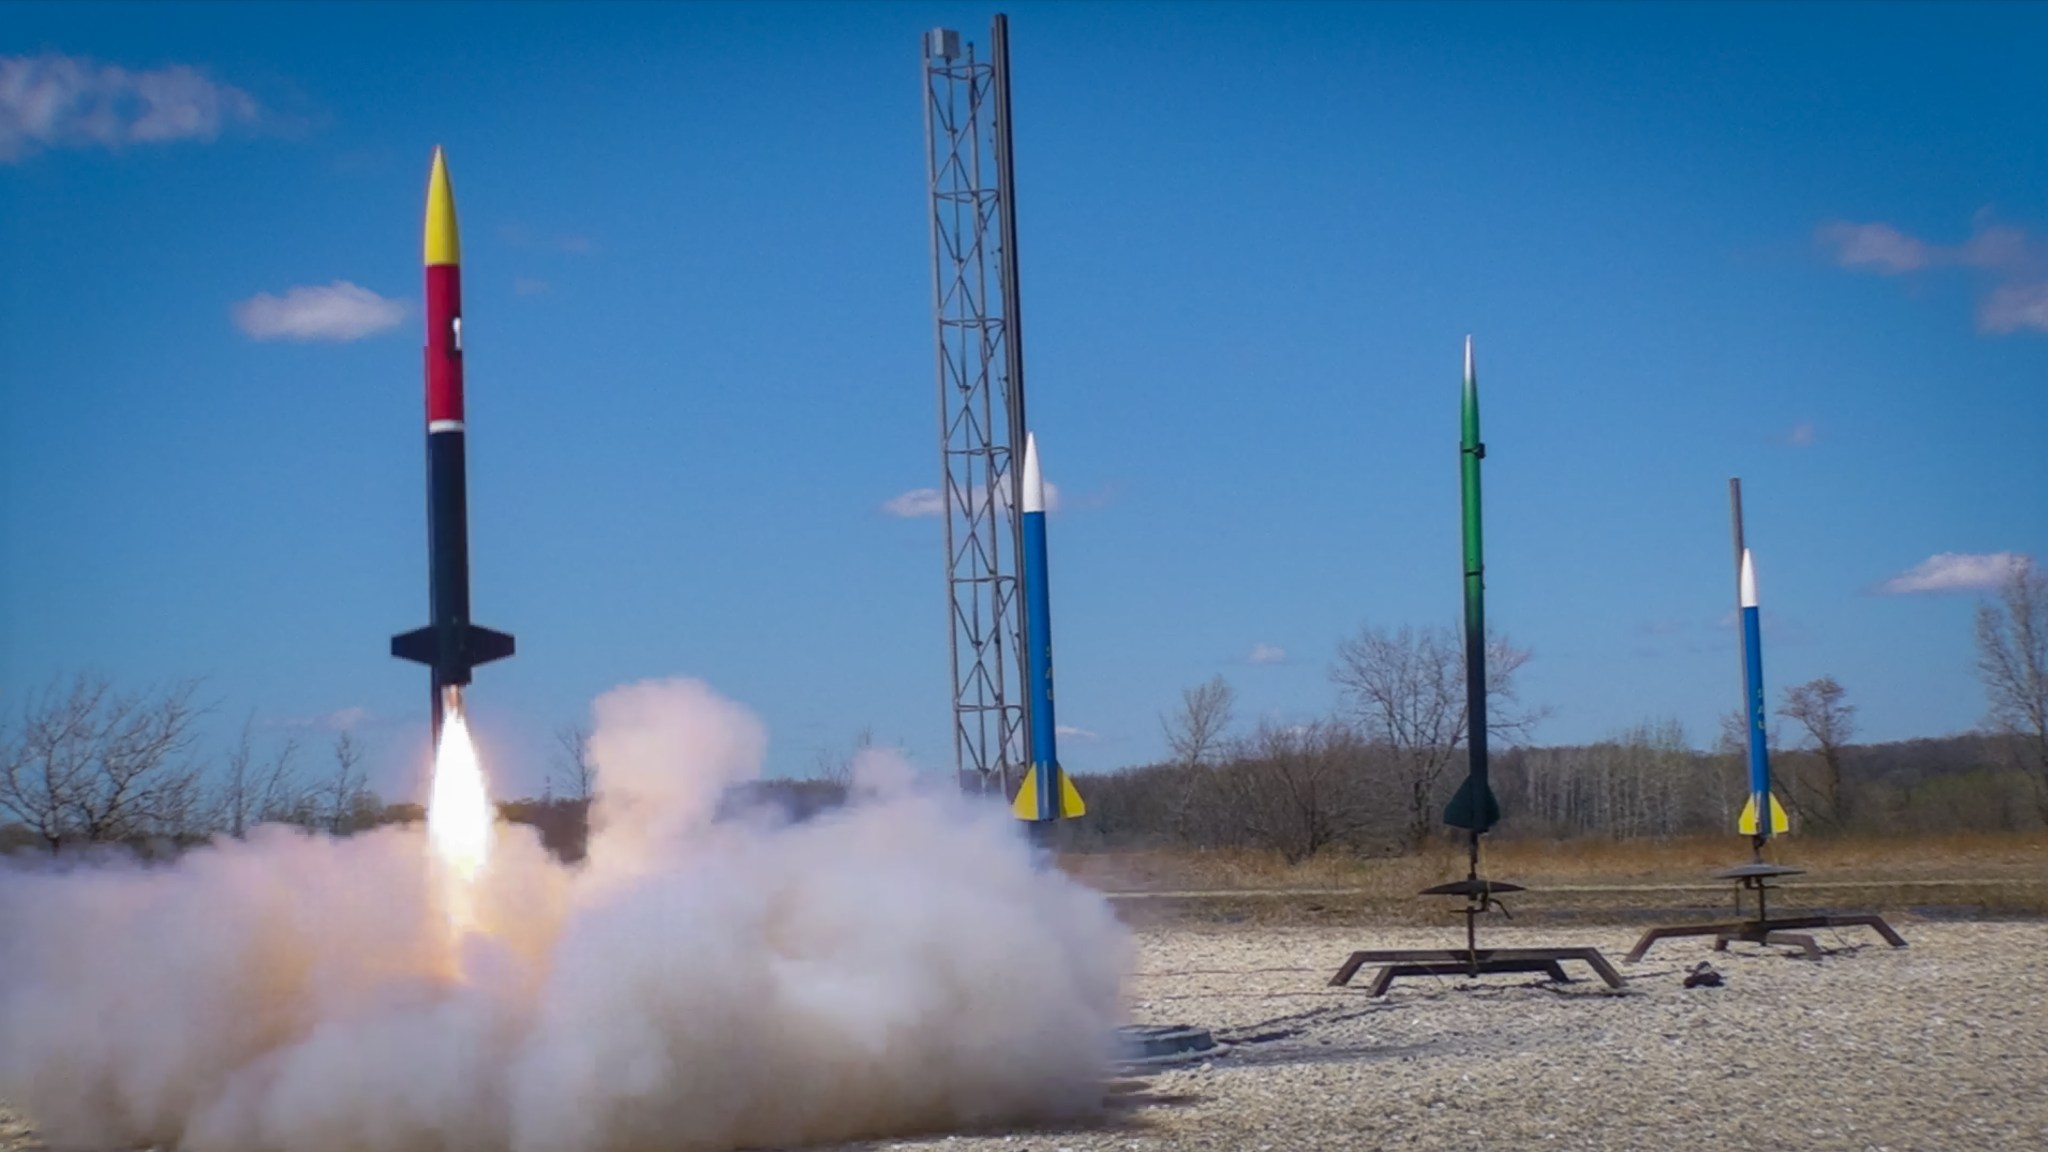 High-powered rockets are launched during the Wisconsin Space Grant Consortium's First Nations Launch competition in 2019.